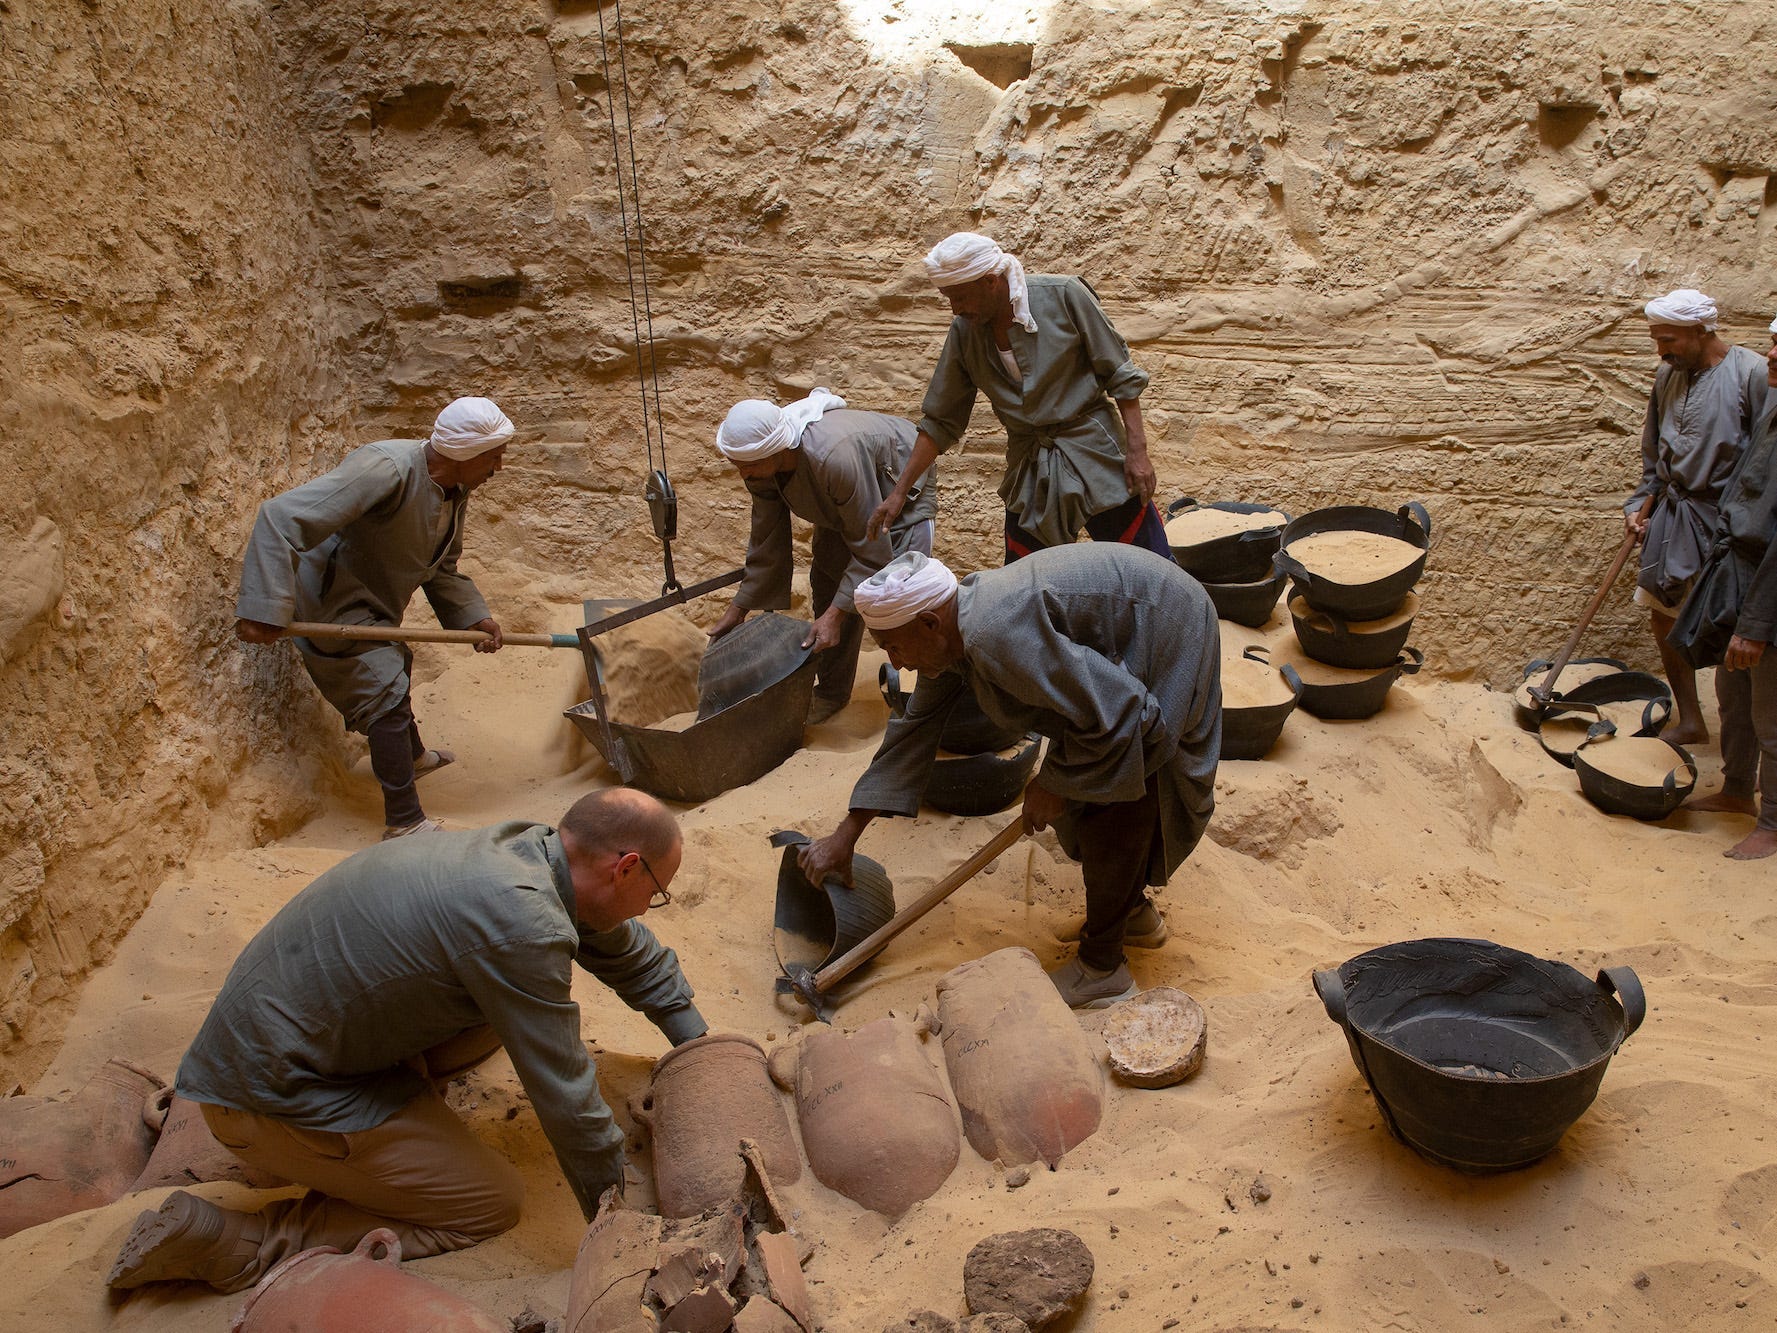 People working to uncover the jars in the embalming shaft in Abusir.